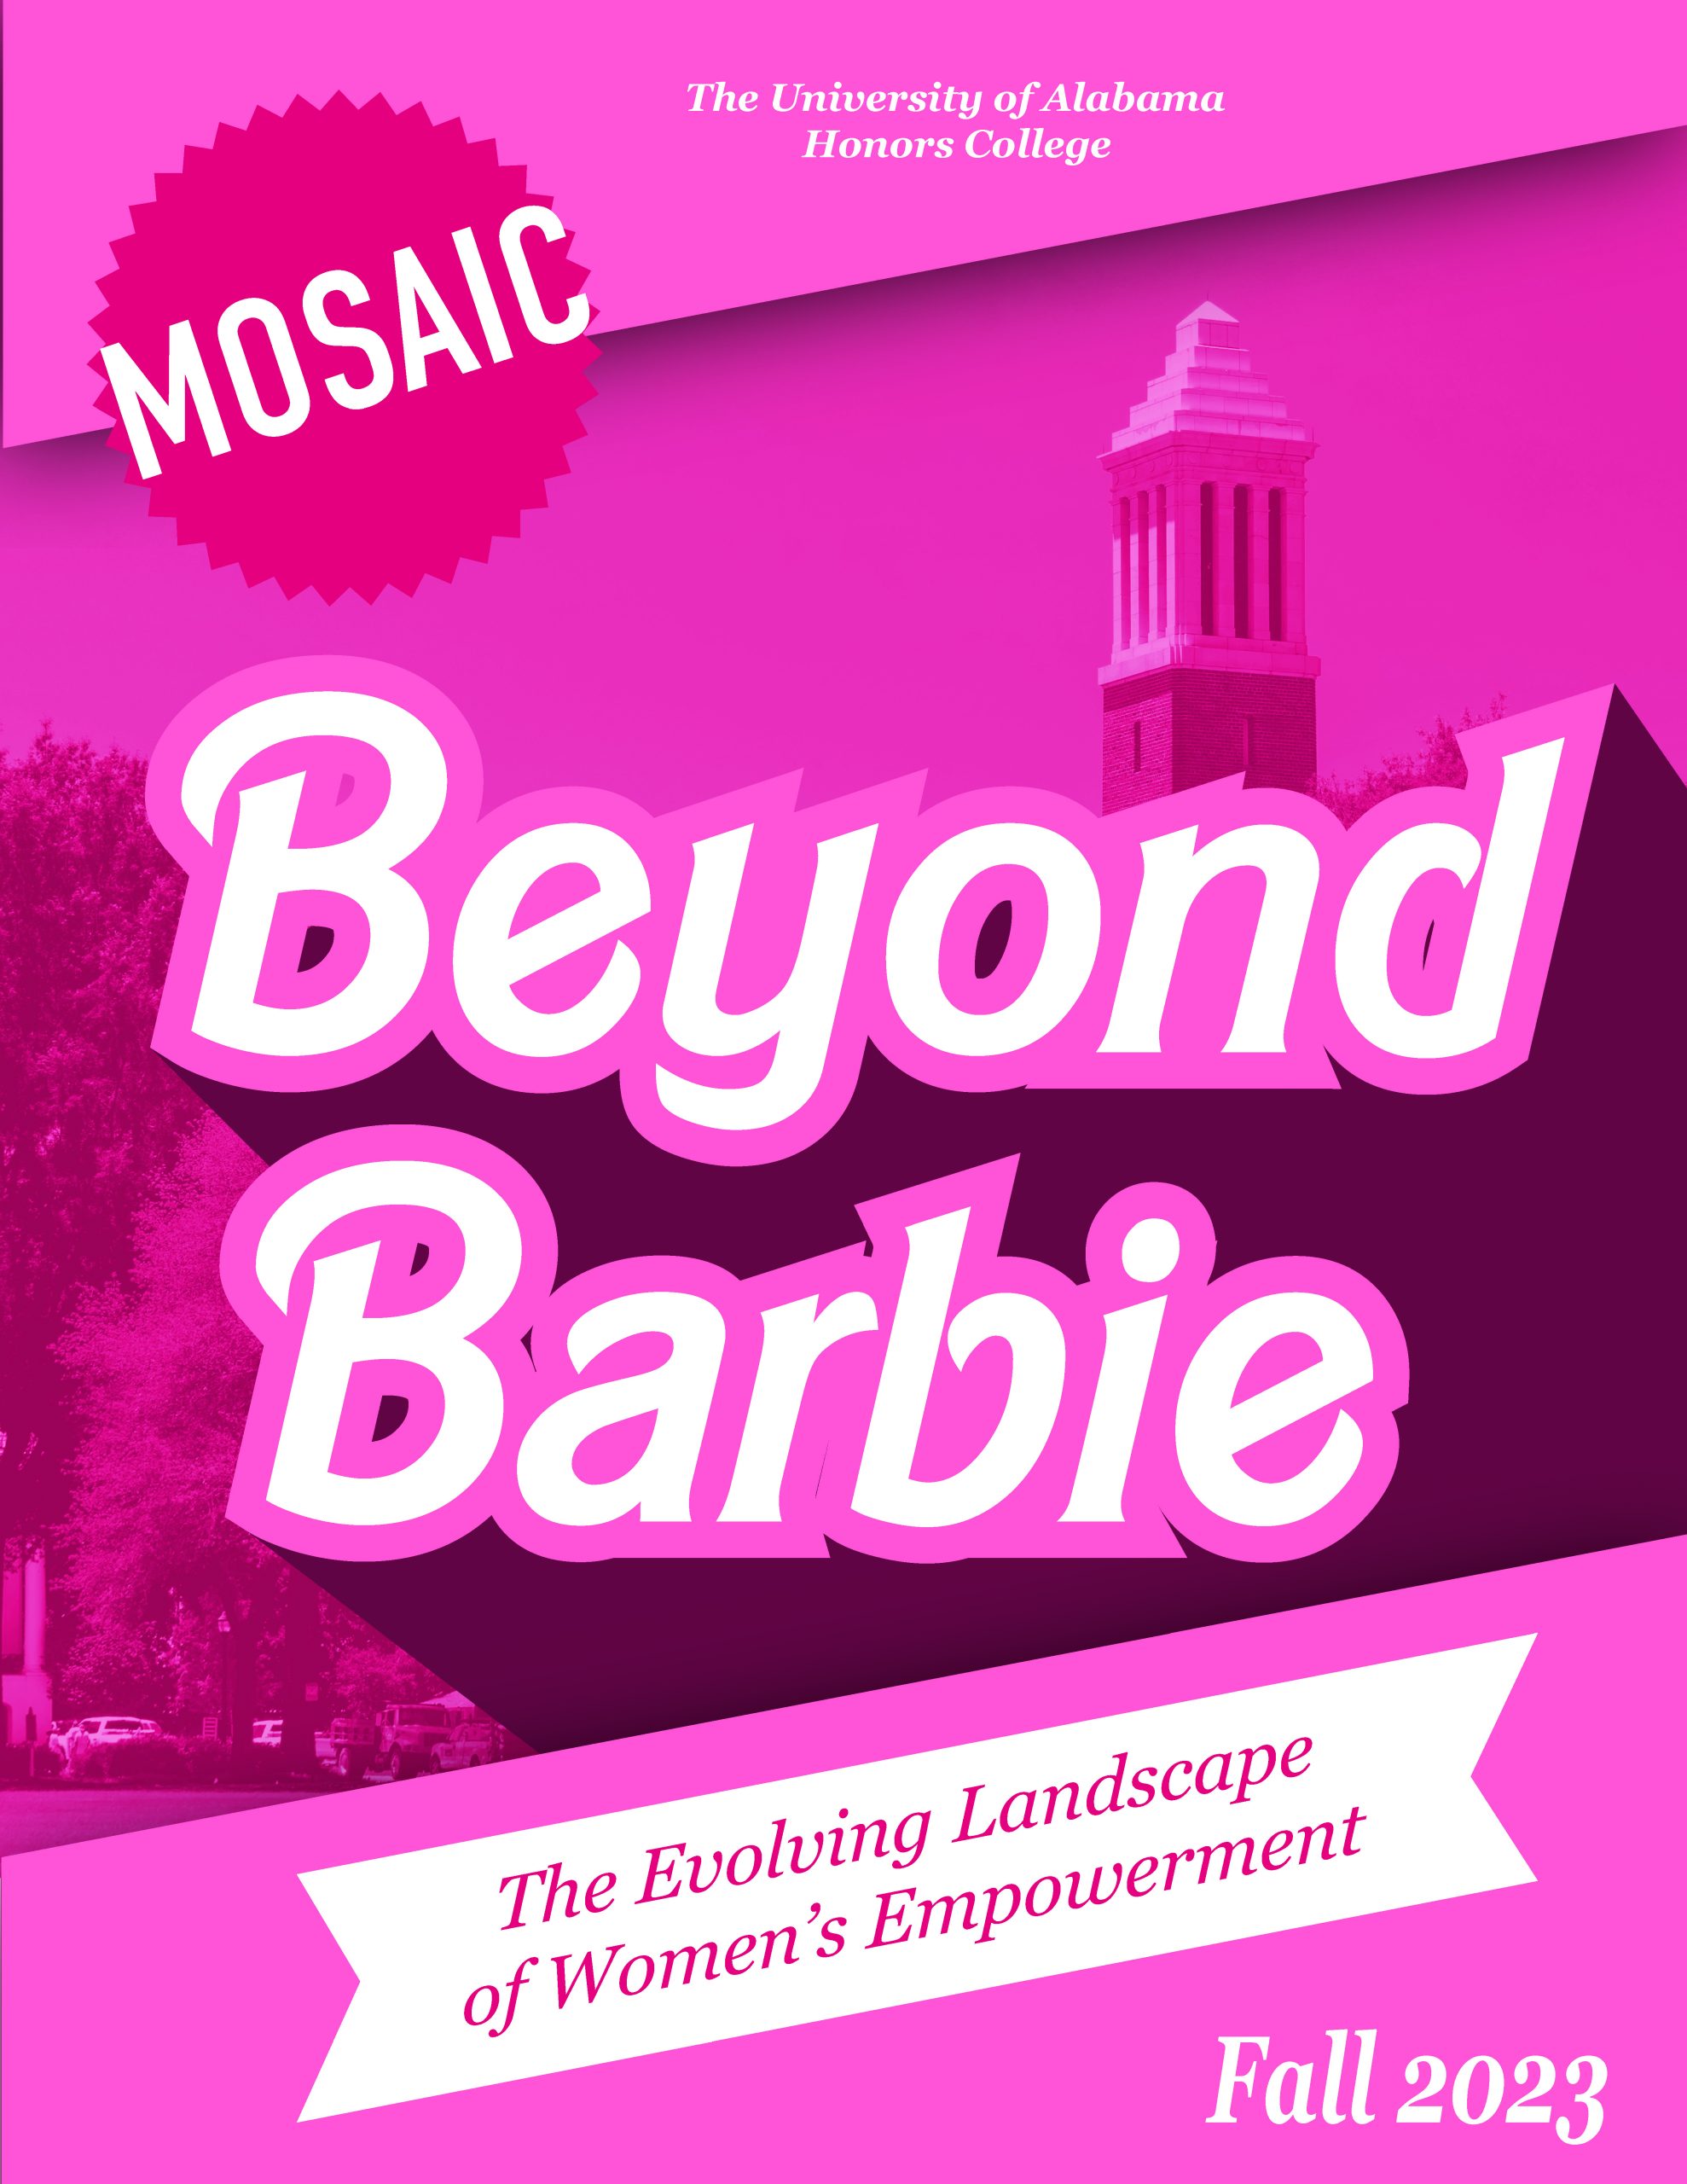 Beyond Barbie: The Evolving Landscape of Women's Empowerment, Fall 2023